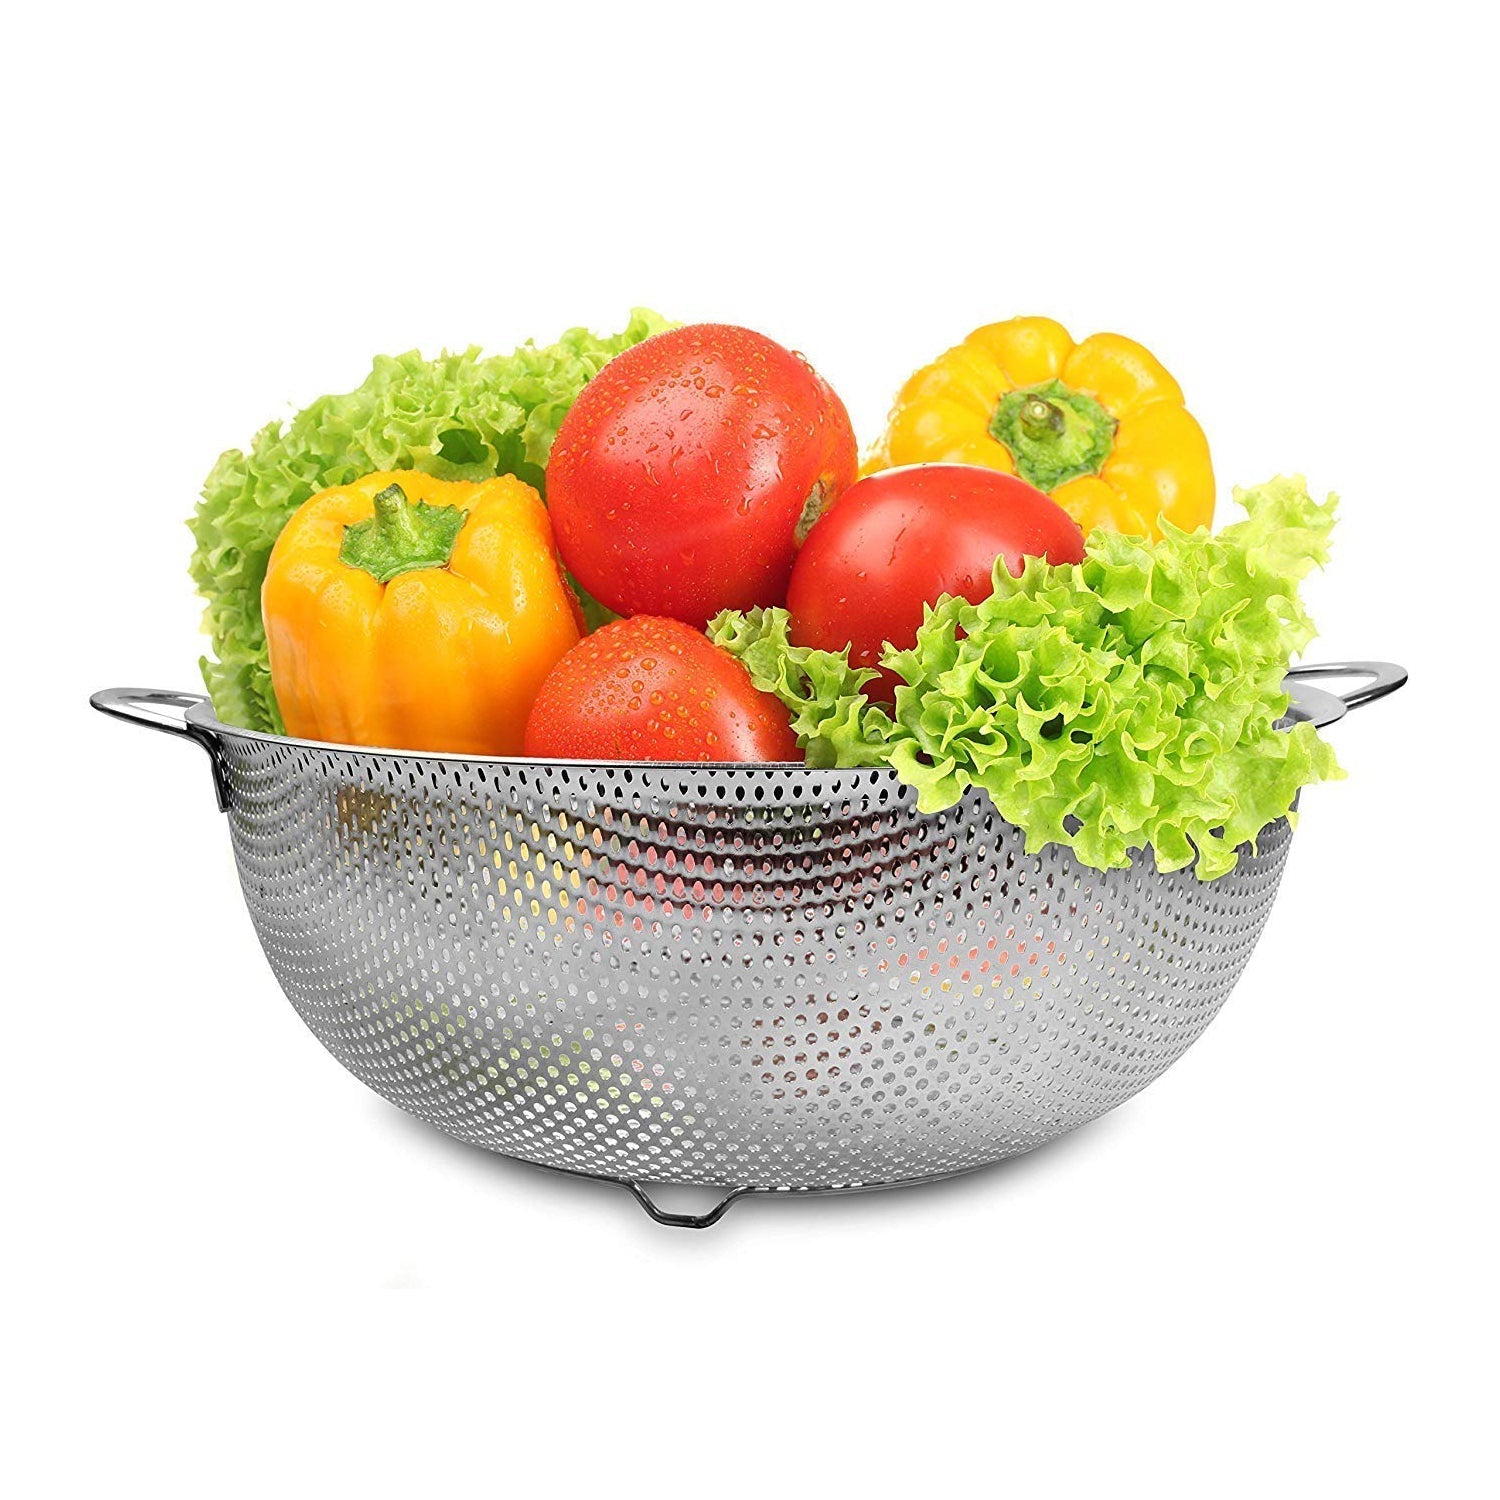 2914 Stainless Steel Rice Vegetables Washing Bowl Strainer Collapsible Strainer. DeoDap